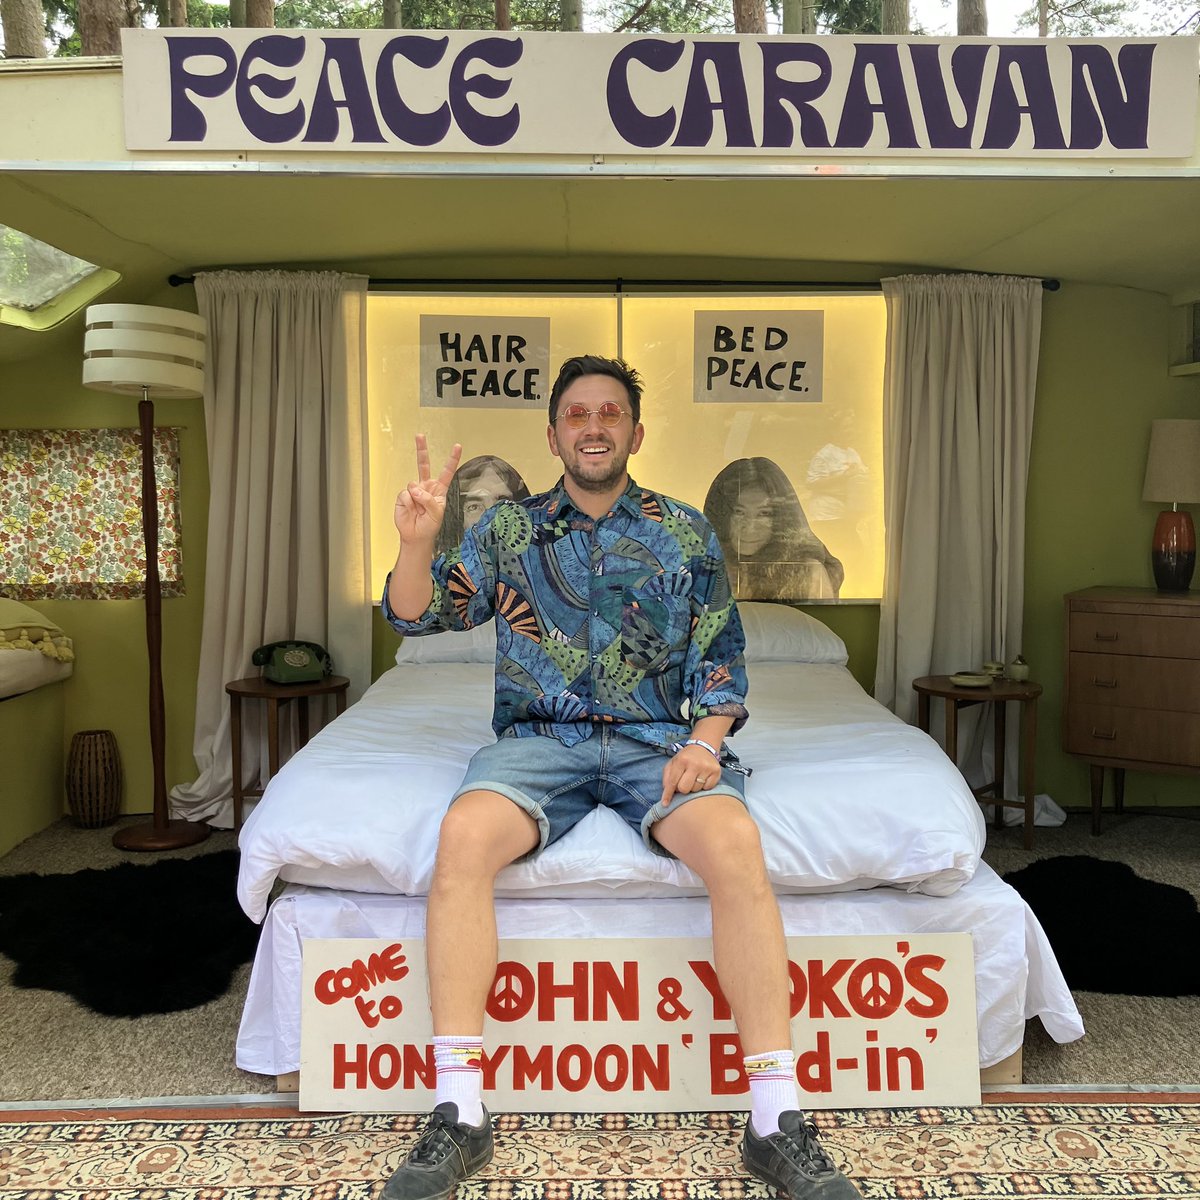 Loved the John & Yoko Peace Caravan at @LatitudeFest!✌️

What a weekend it’s been so far! Still to come…

Today, 3PM - @tramlines fringe, Dev Green Stage
Tomorrow, 2PM - @splendourfest, Hill Stage
Tomorrow, 6PM - @Nozstock, Garden Stage